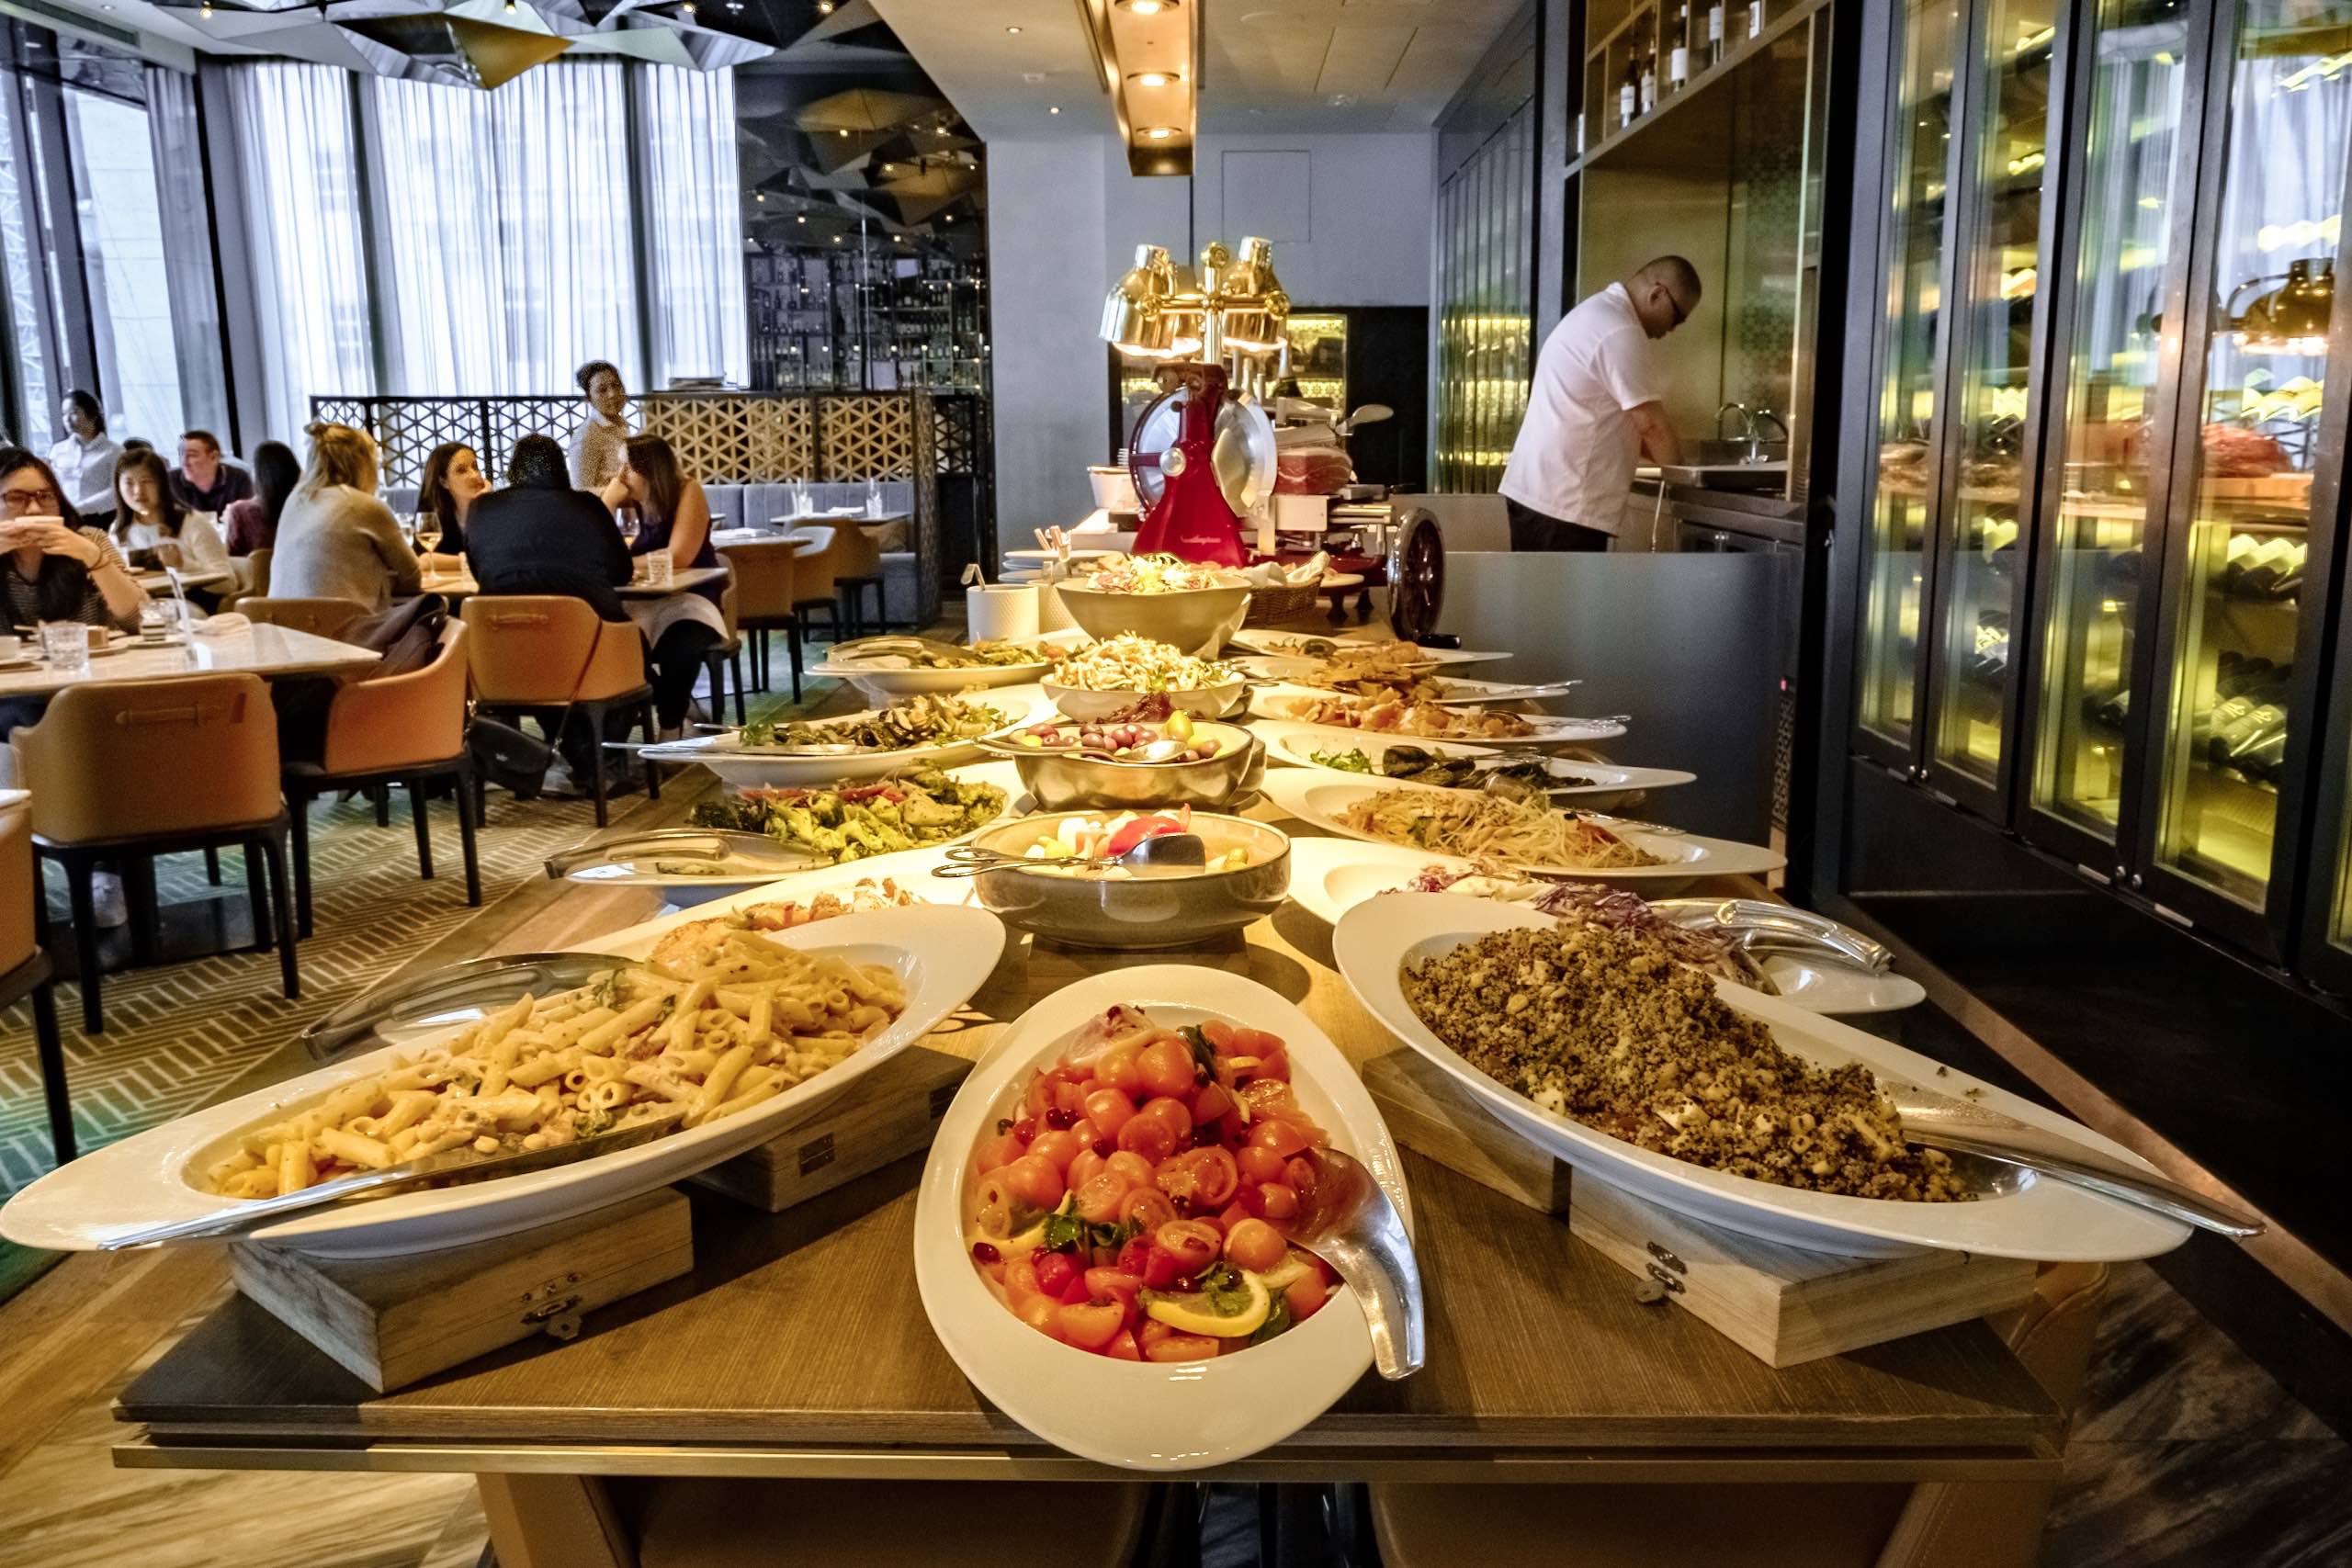 The spread of cold plates at Porterhouse’s Sunday roast brunch buffet. Photo: Tomas Wiik